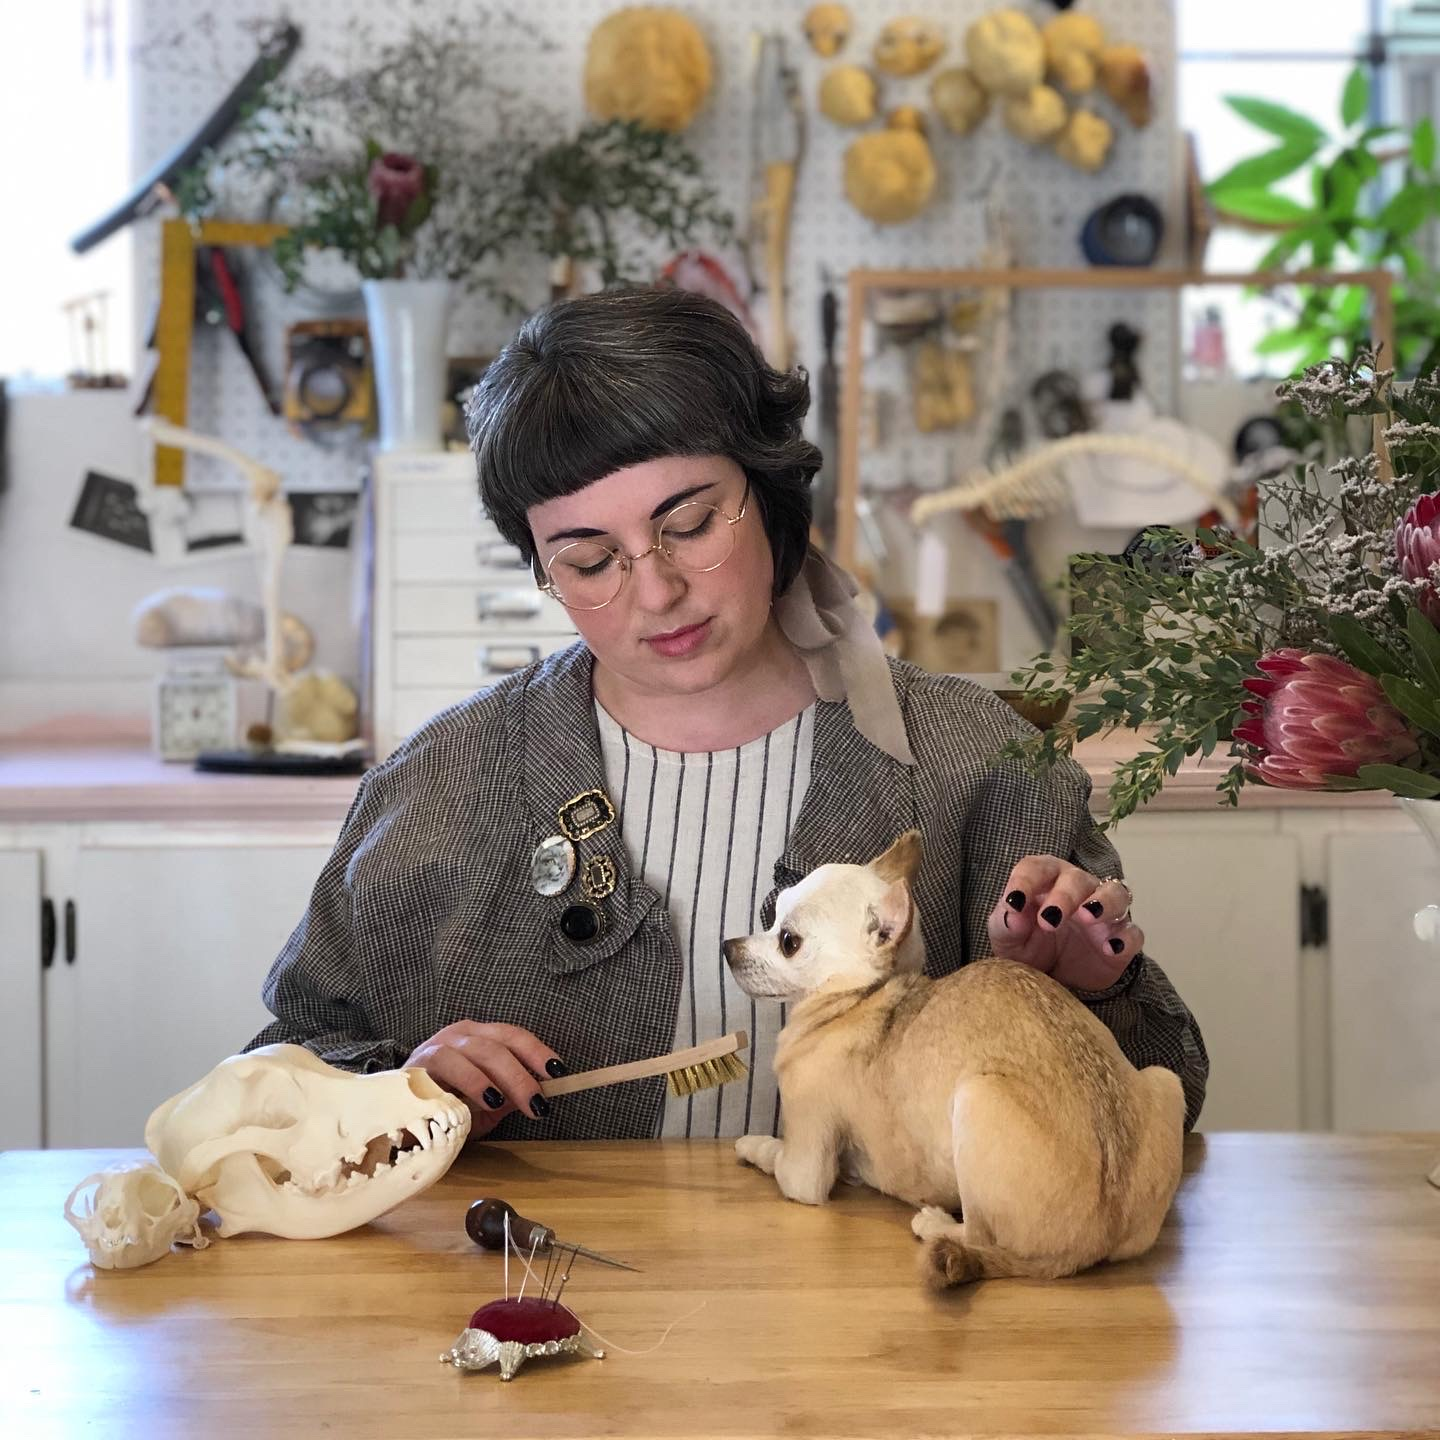 Lauren in her workshop next to a skull and a taxidermied dog